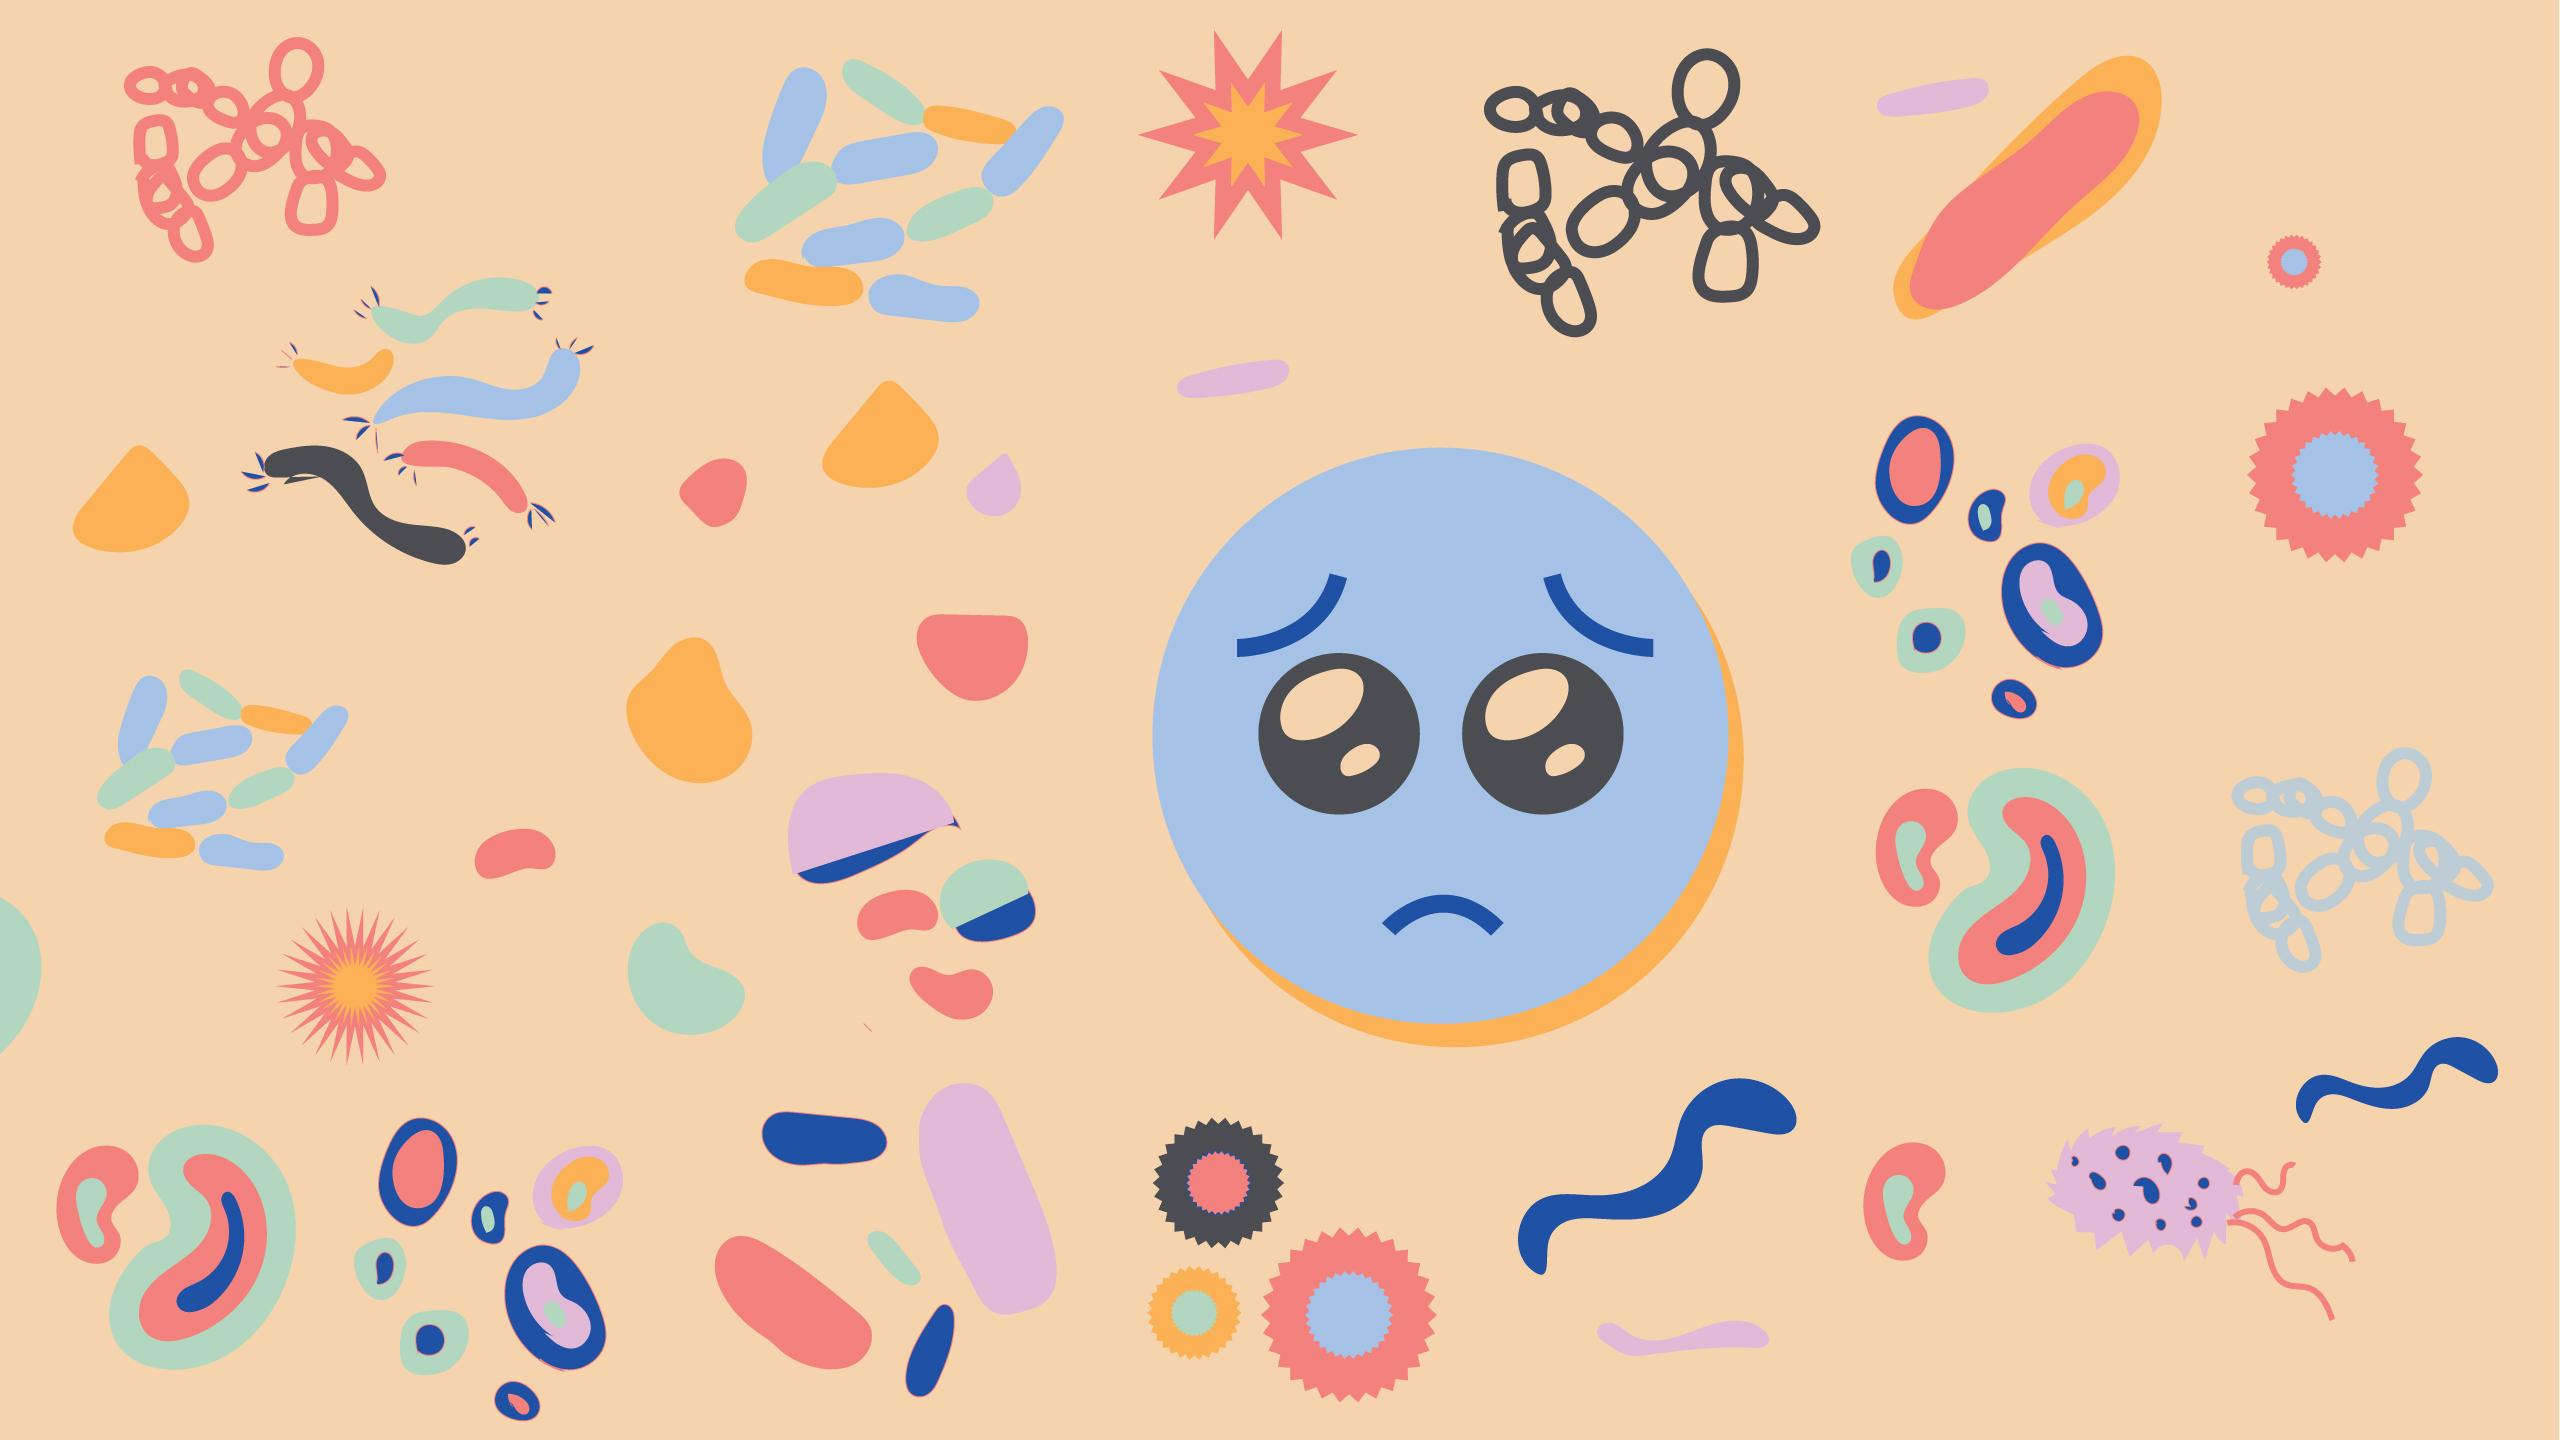 A tear-filled emoji looks at the germs floating around it amidst the COVID-19 epidemic.